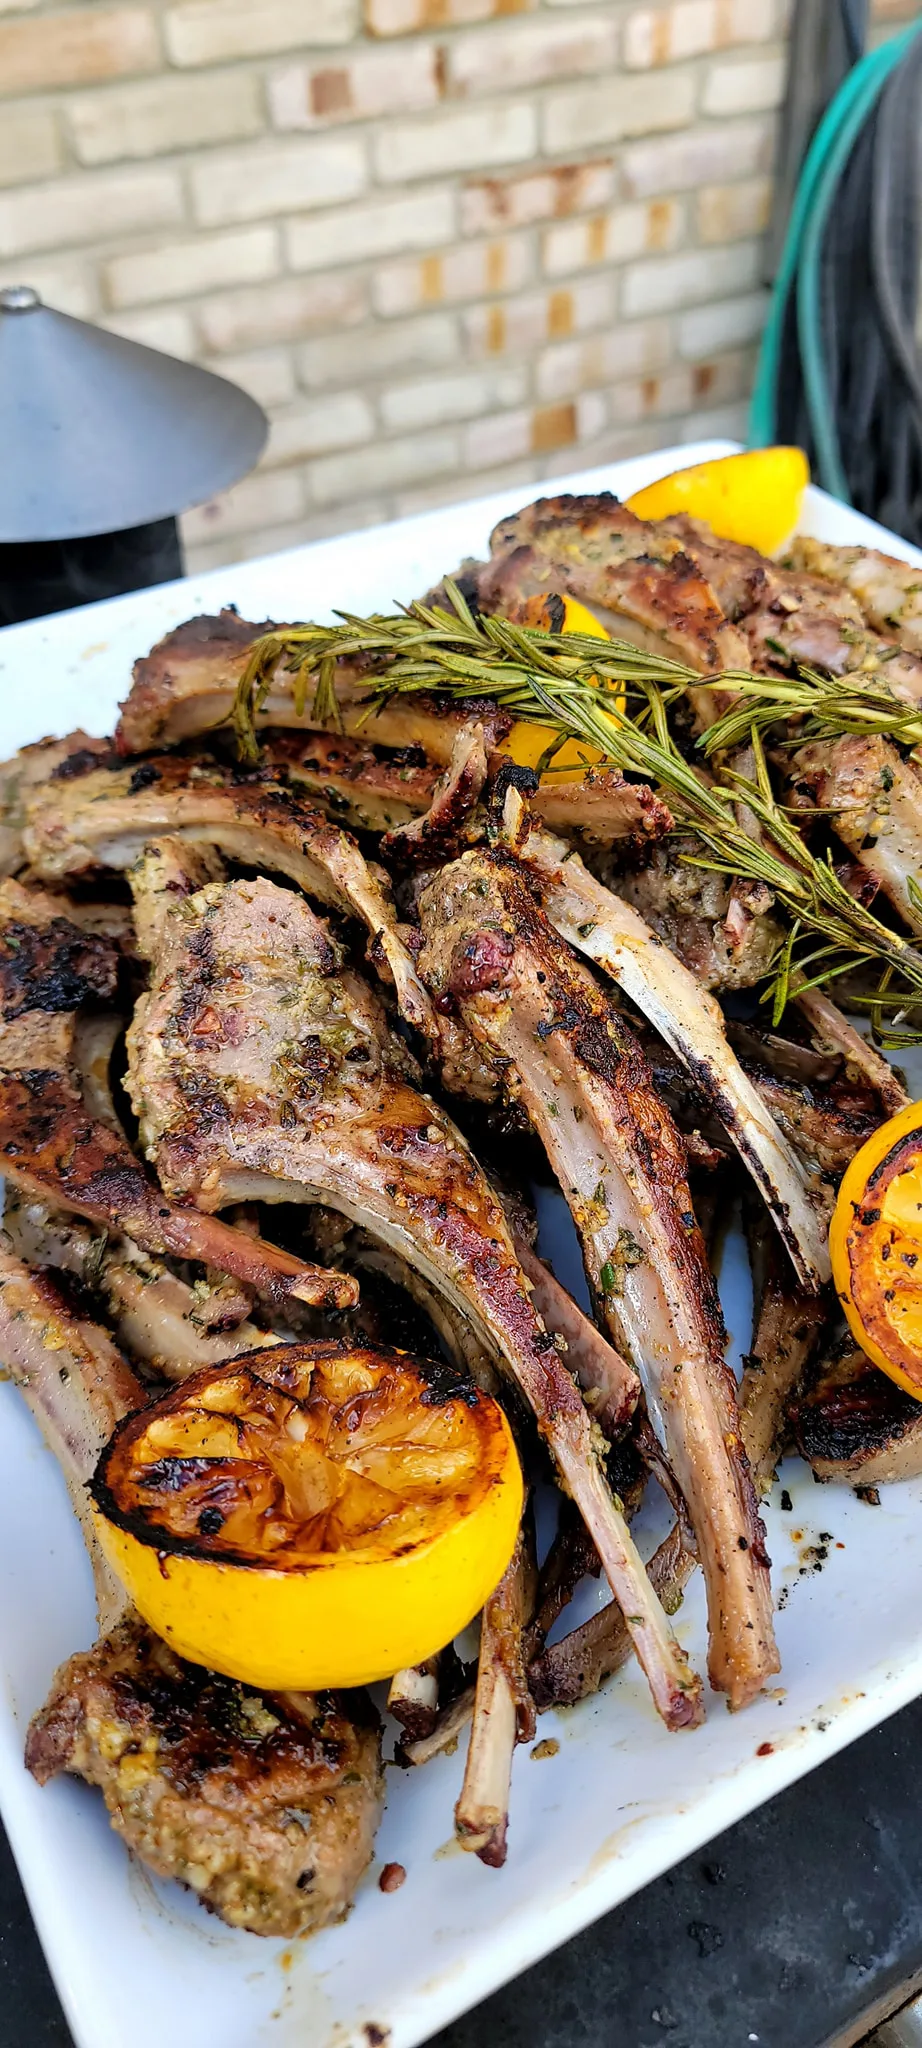 Grilled Lamb Chops with Herb Marinade, Vinegar-Mustard Baste, and Mint and Yogurt Sauce